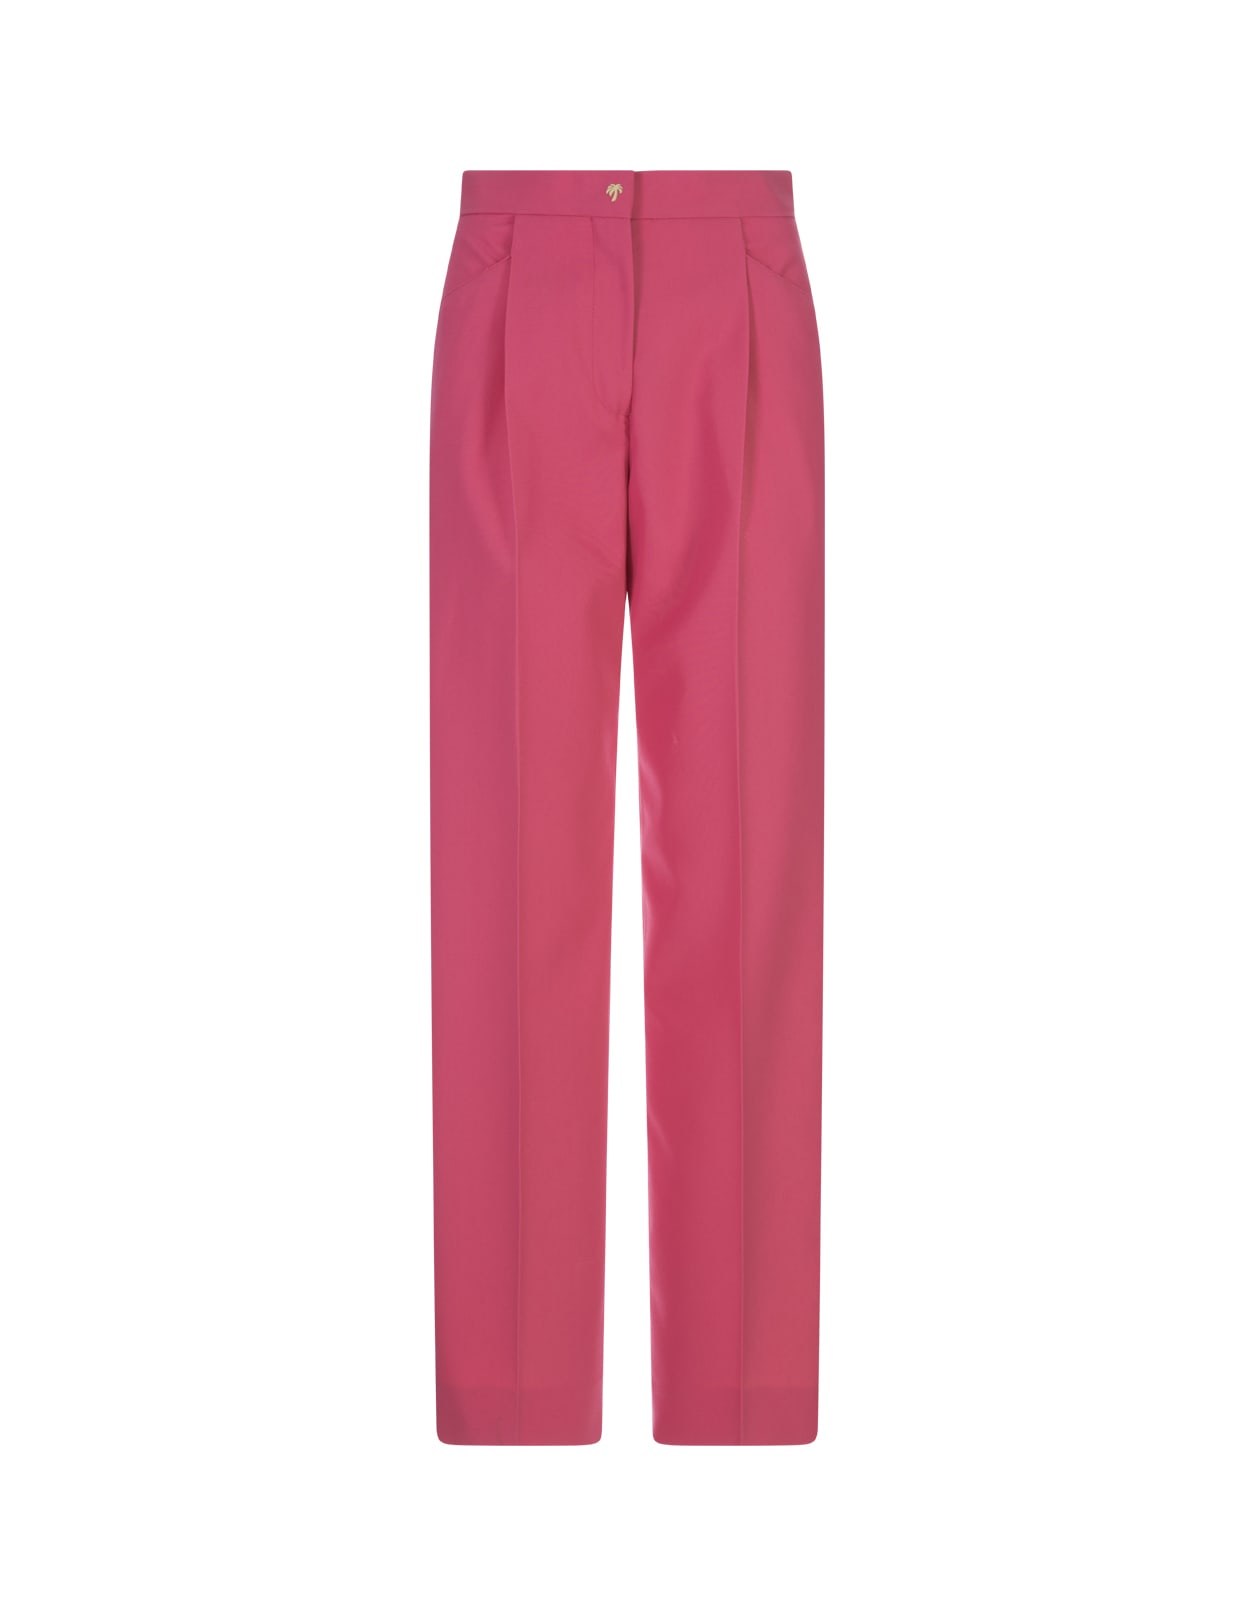 PALM ANGELS MIAMI TAILORED PANTS IN FUCHSIA